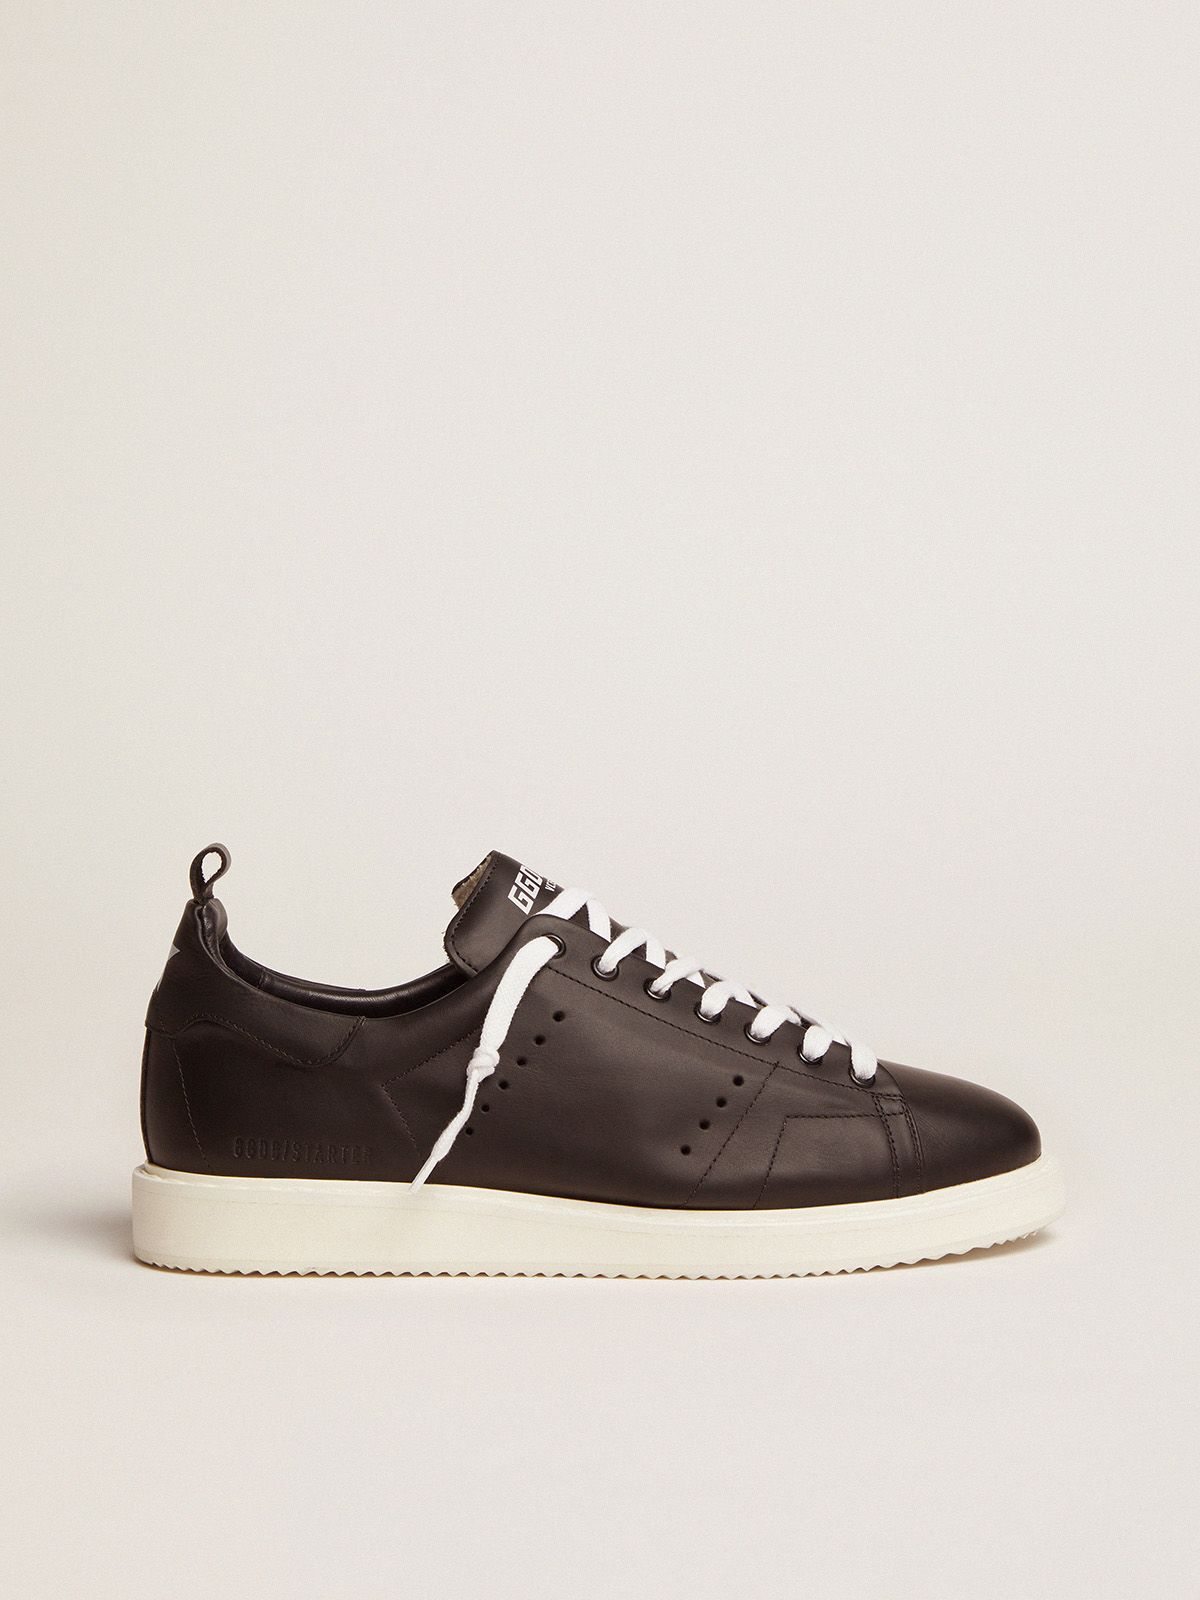 Starter sneakers in total black leather